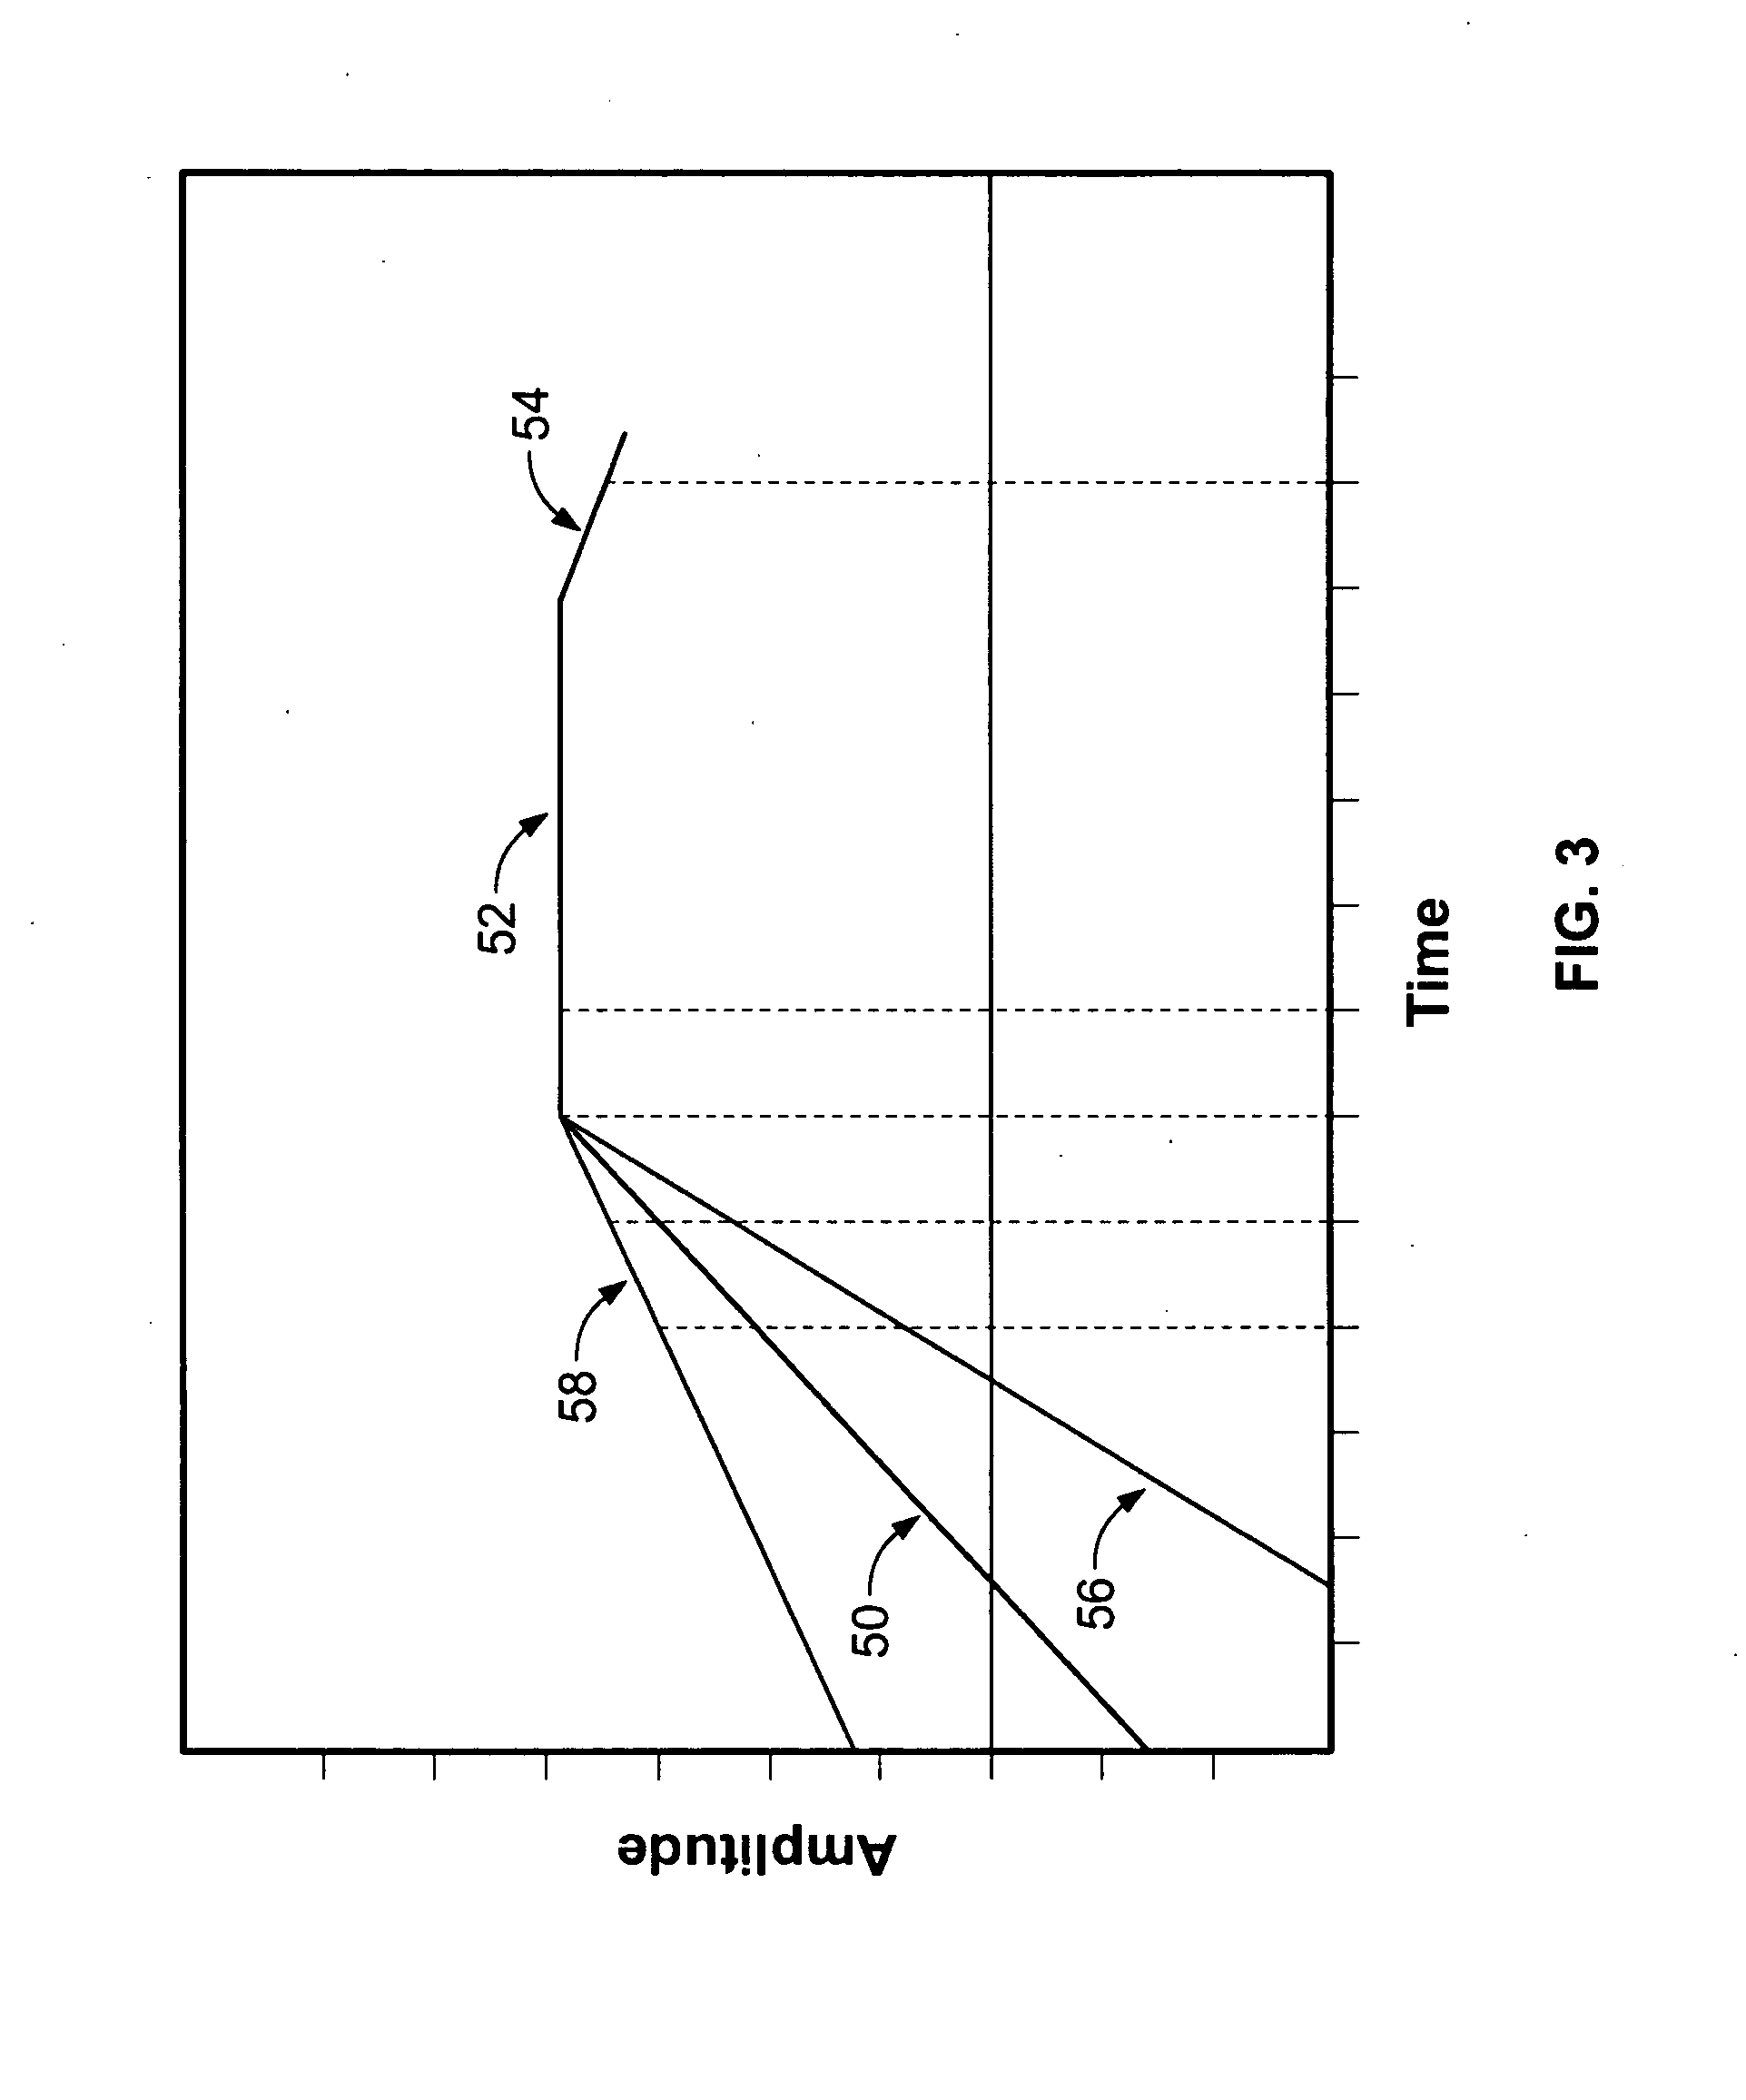 Touch detection method and system for a touch sensor